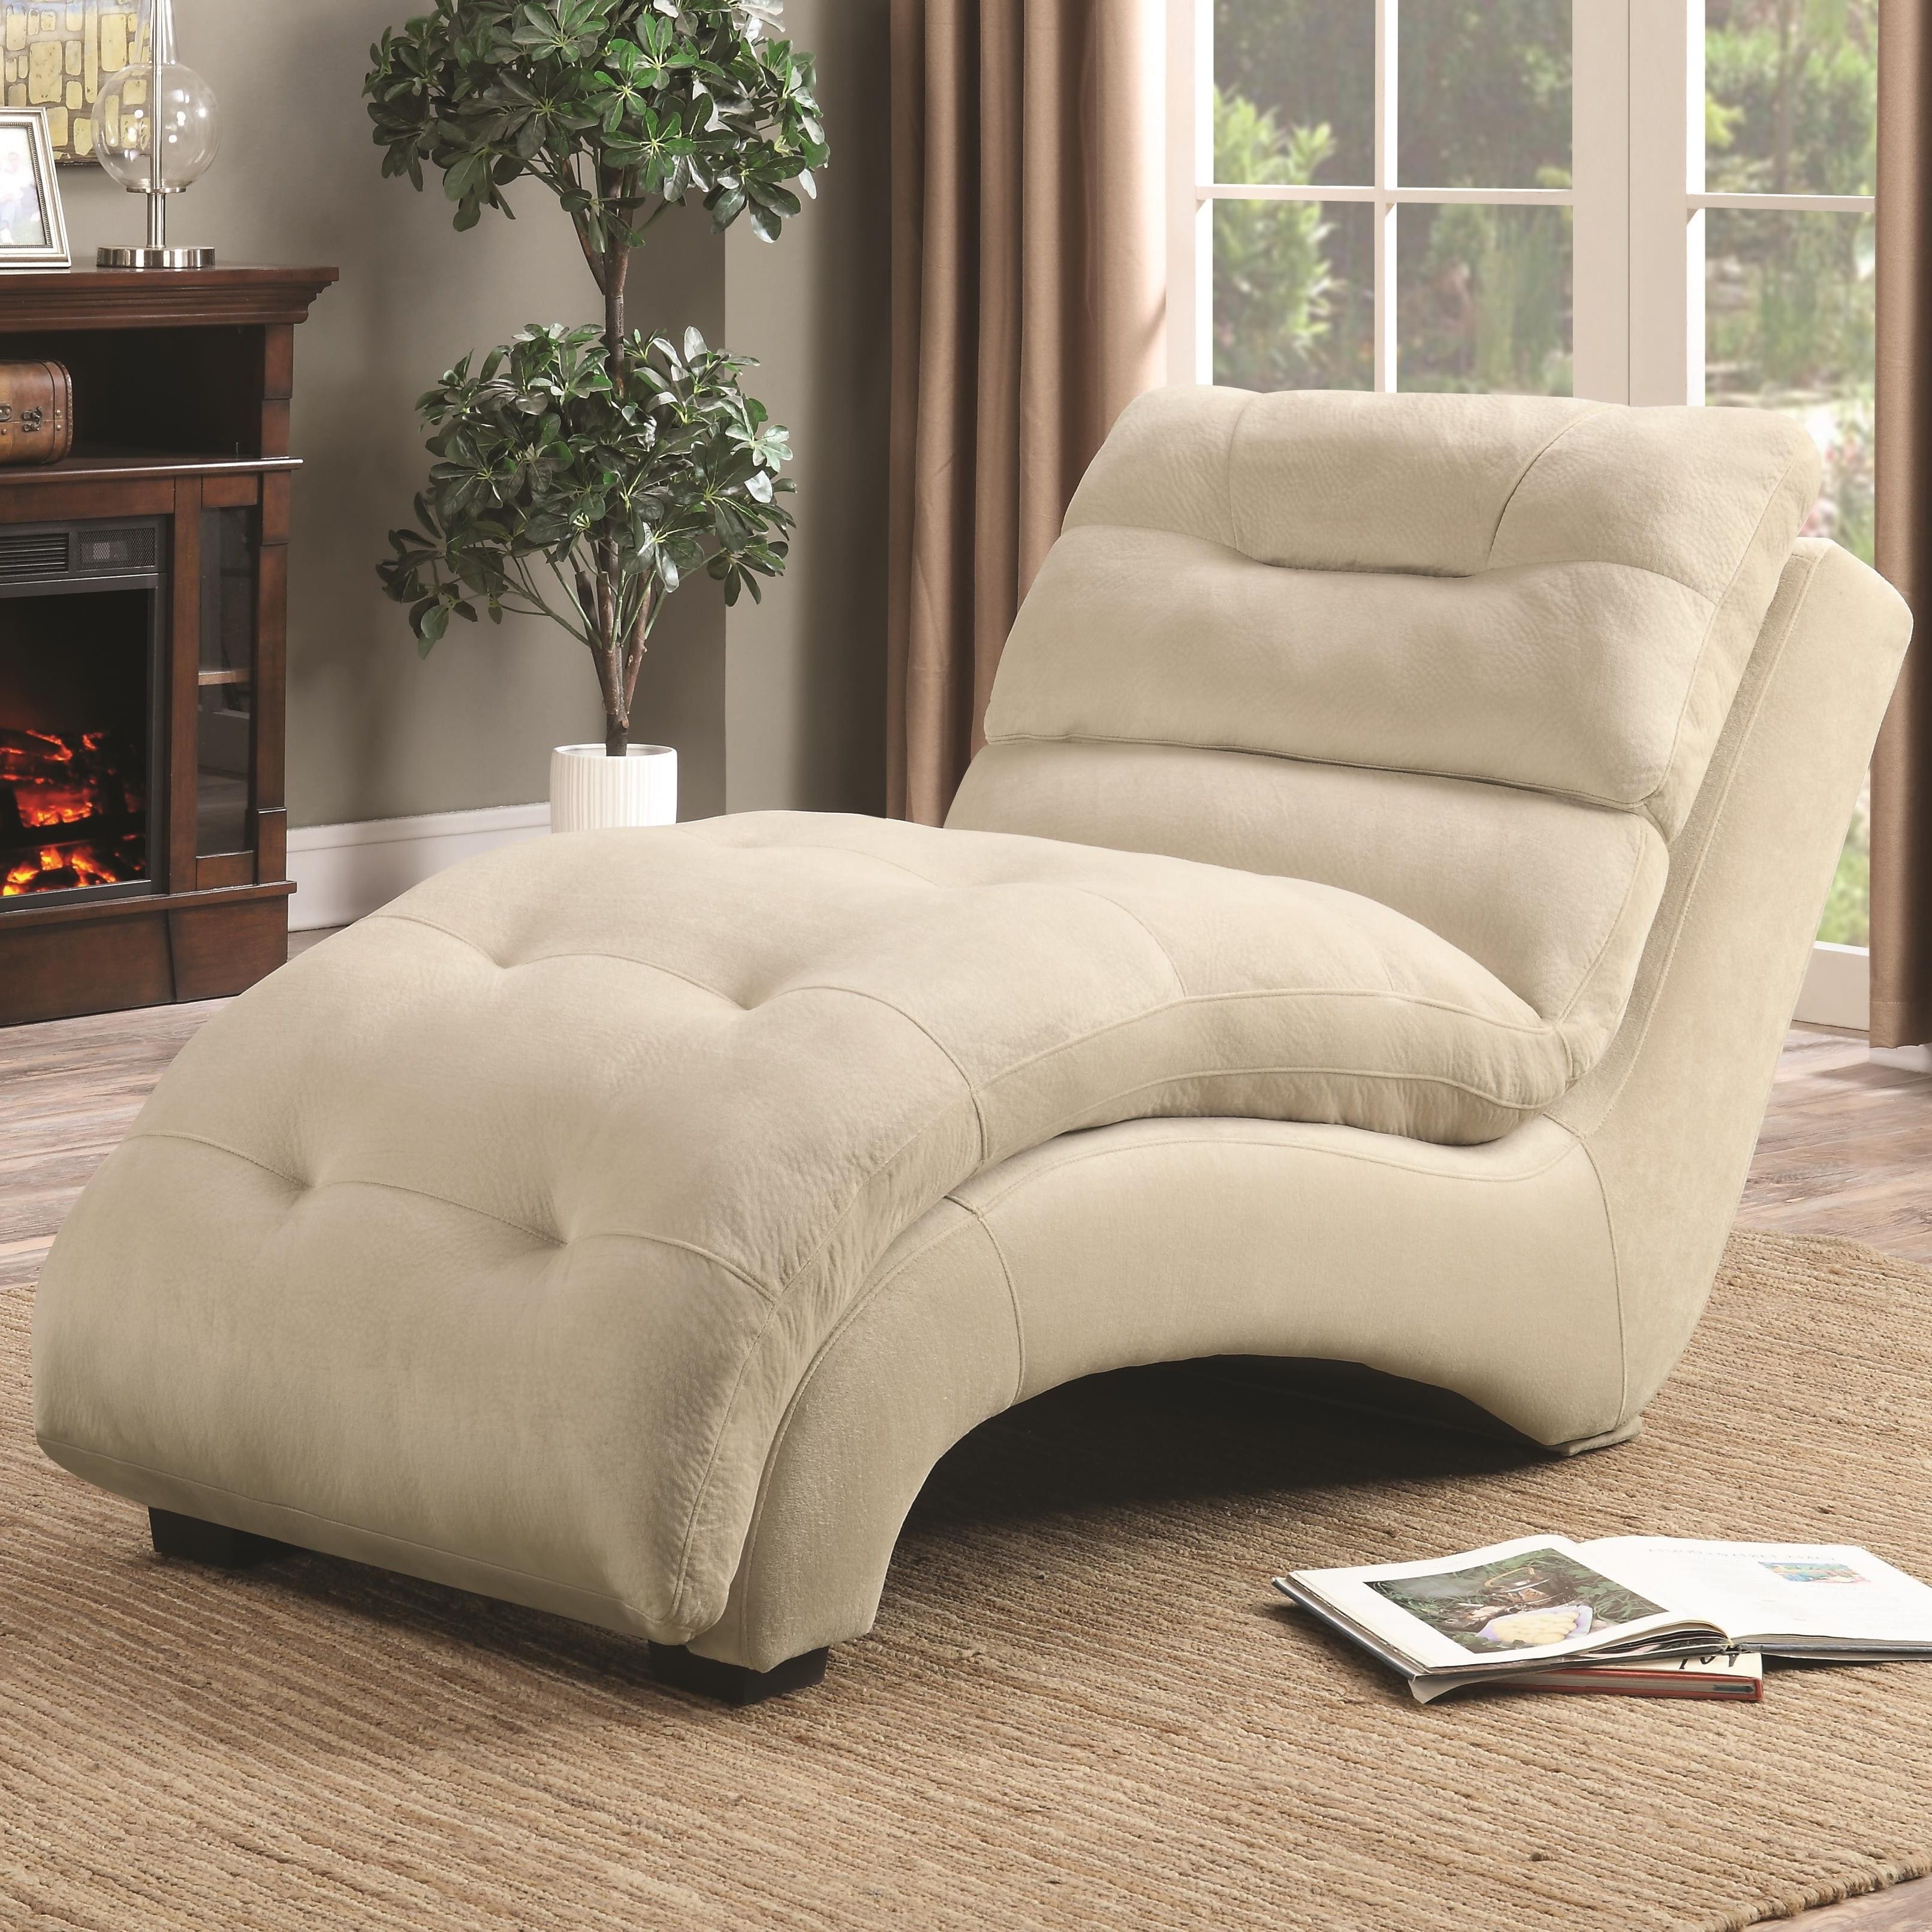 2017 Coaster 550347 Accent Chaise With Arched Base In Tan Padded Upholstery Inside Accent Chaises (View 4 of 15)